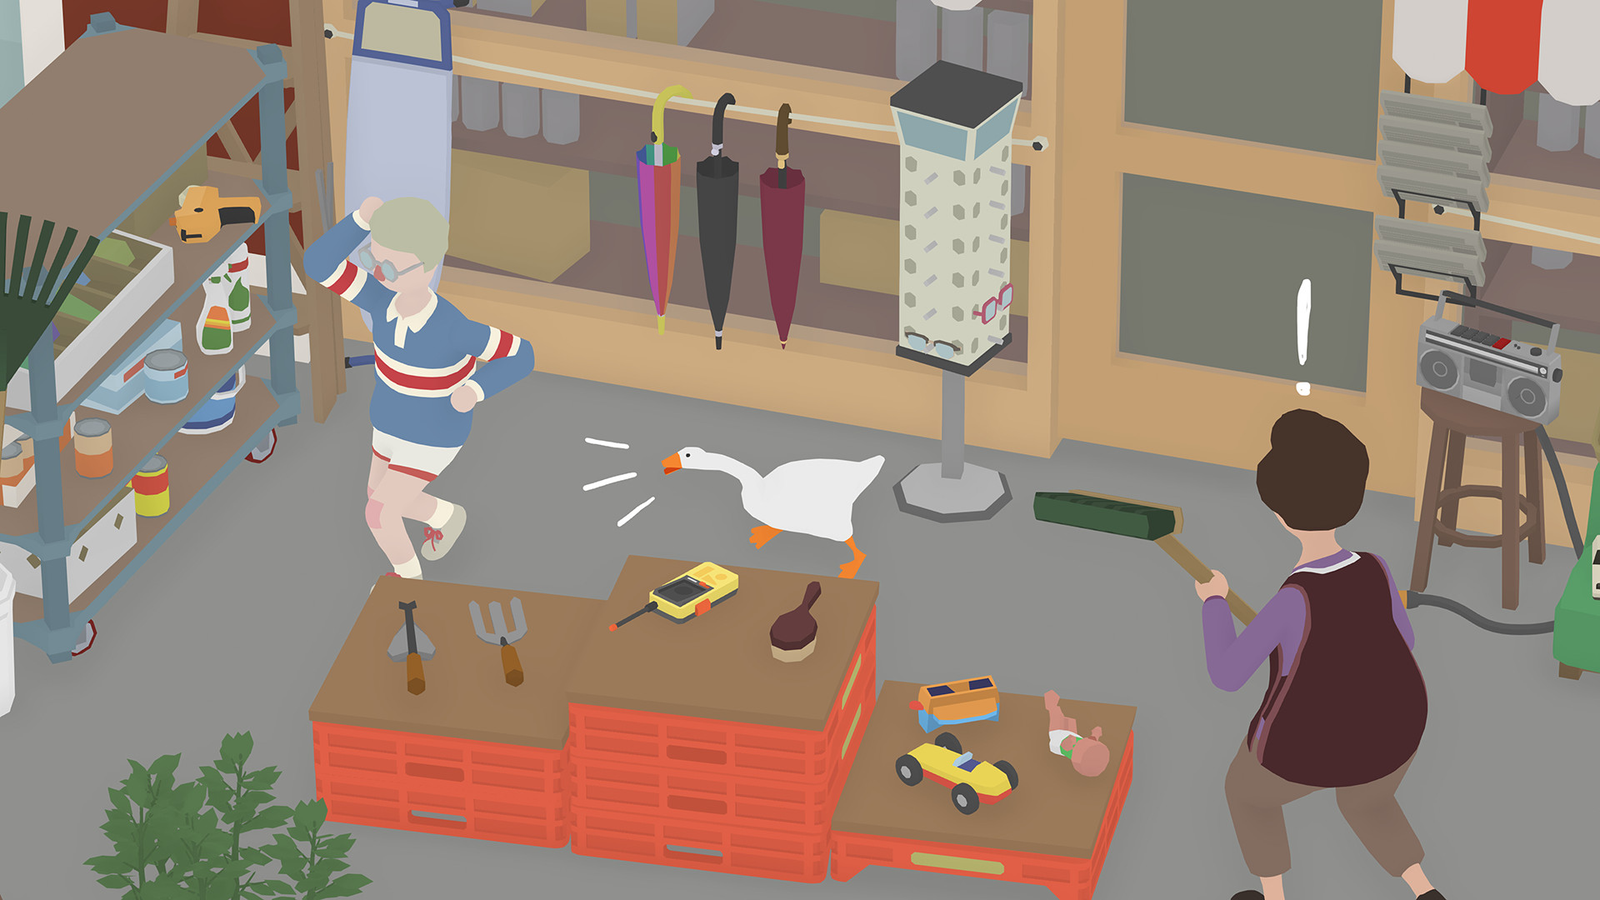 Untitled Goose Game Review: Why the Goose Game Is So Popular